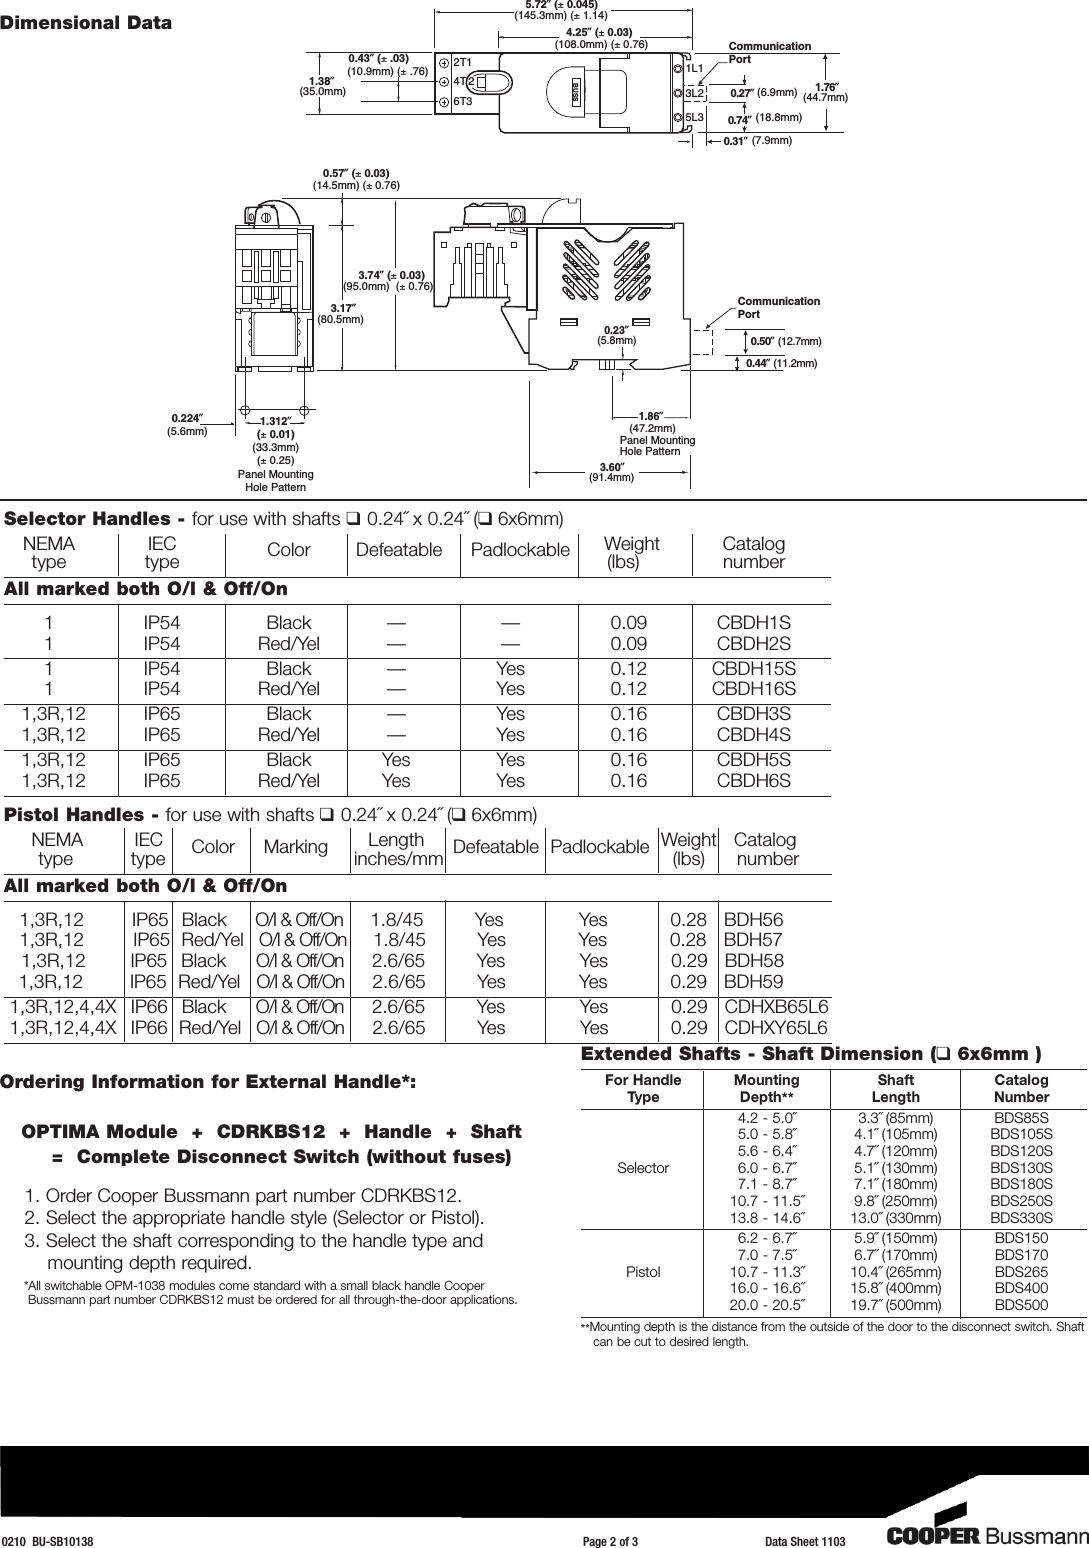 Page 2 of 3 - OPM-1038 S 2-8-10  Brochure